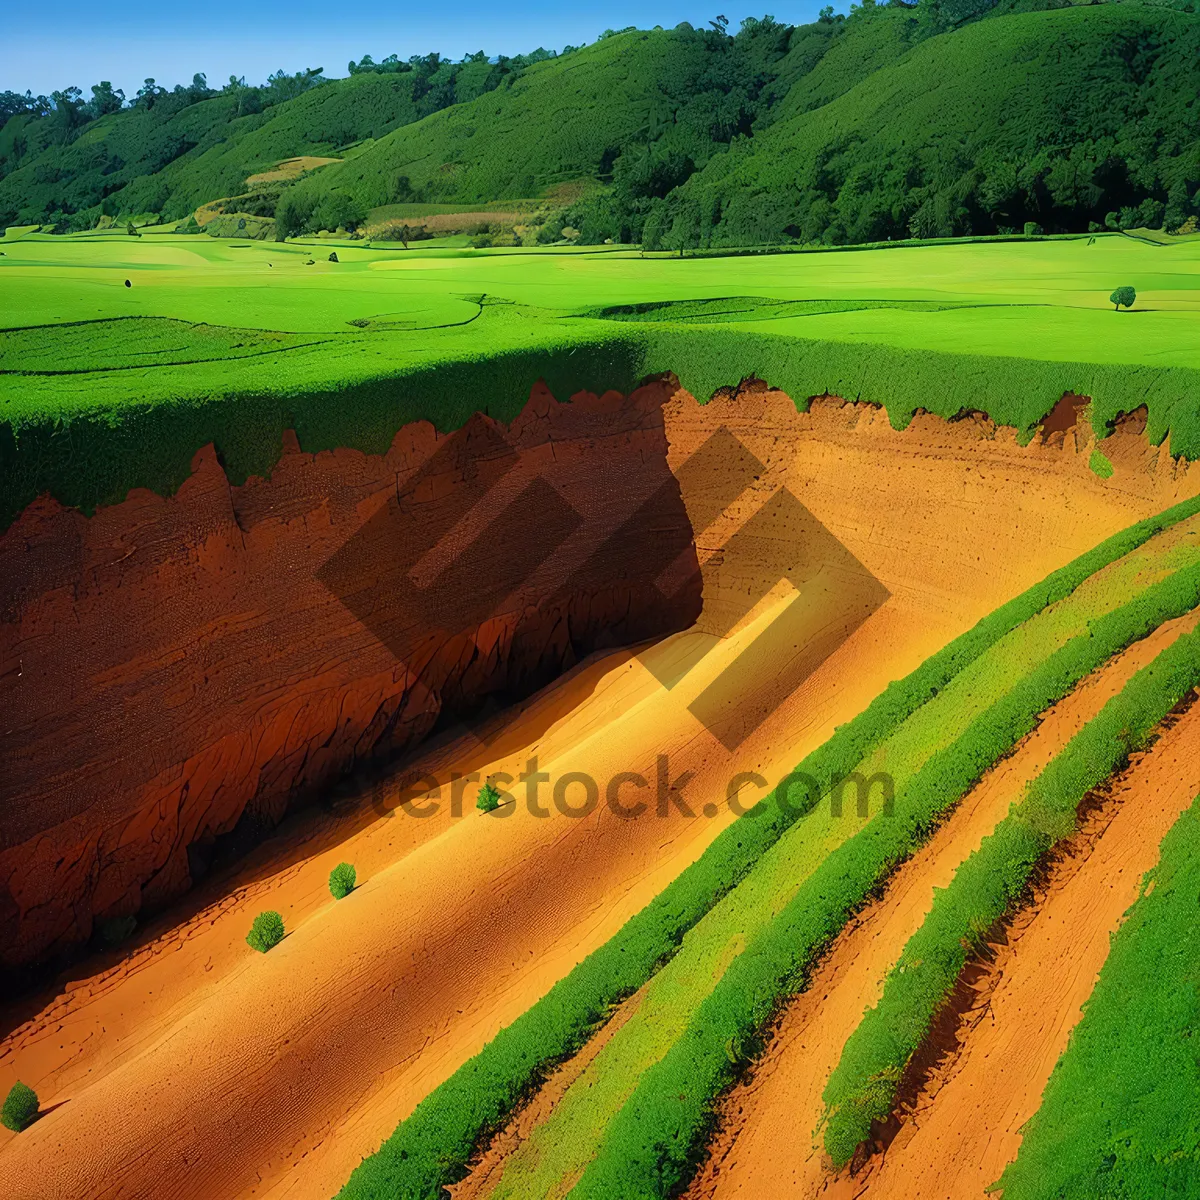 Picture of Highland Rice Fields: Serene Rural Landscape with Rolling Hills